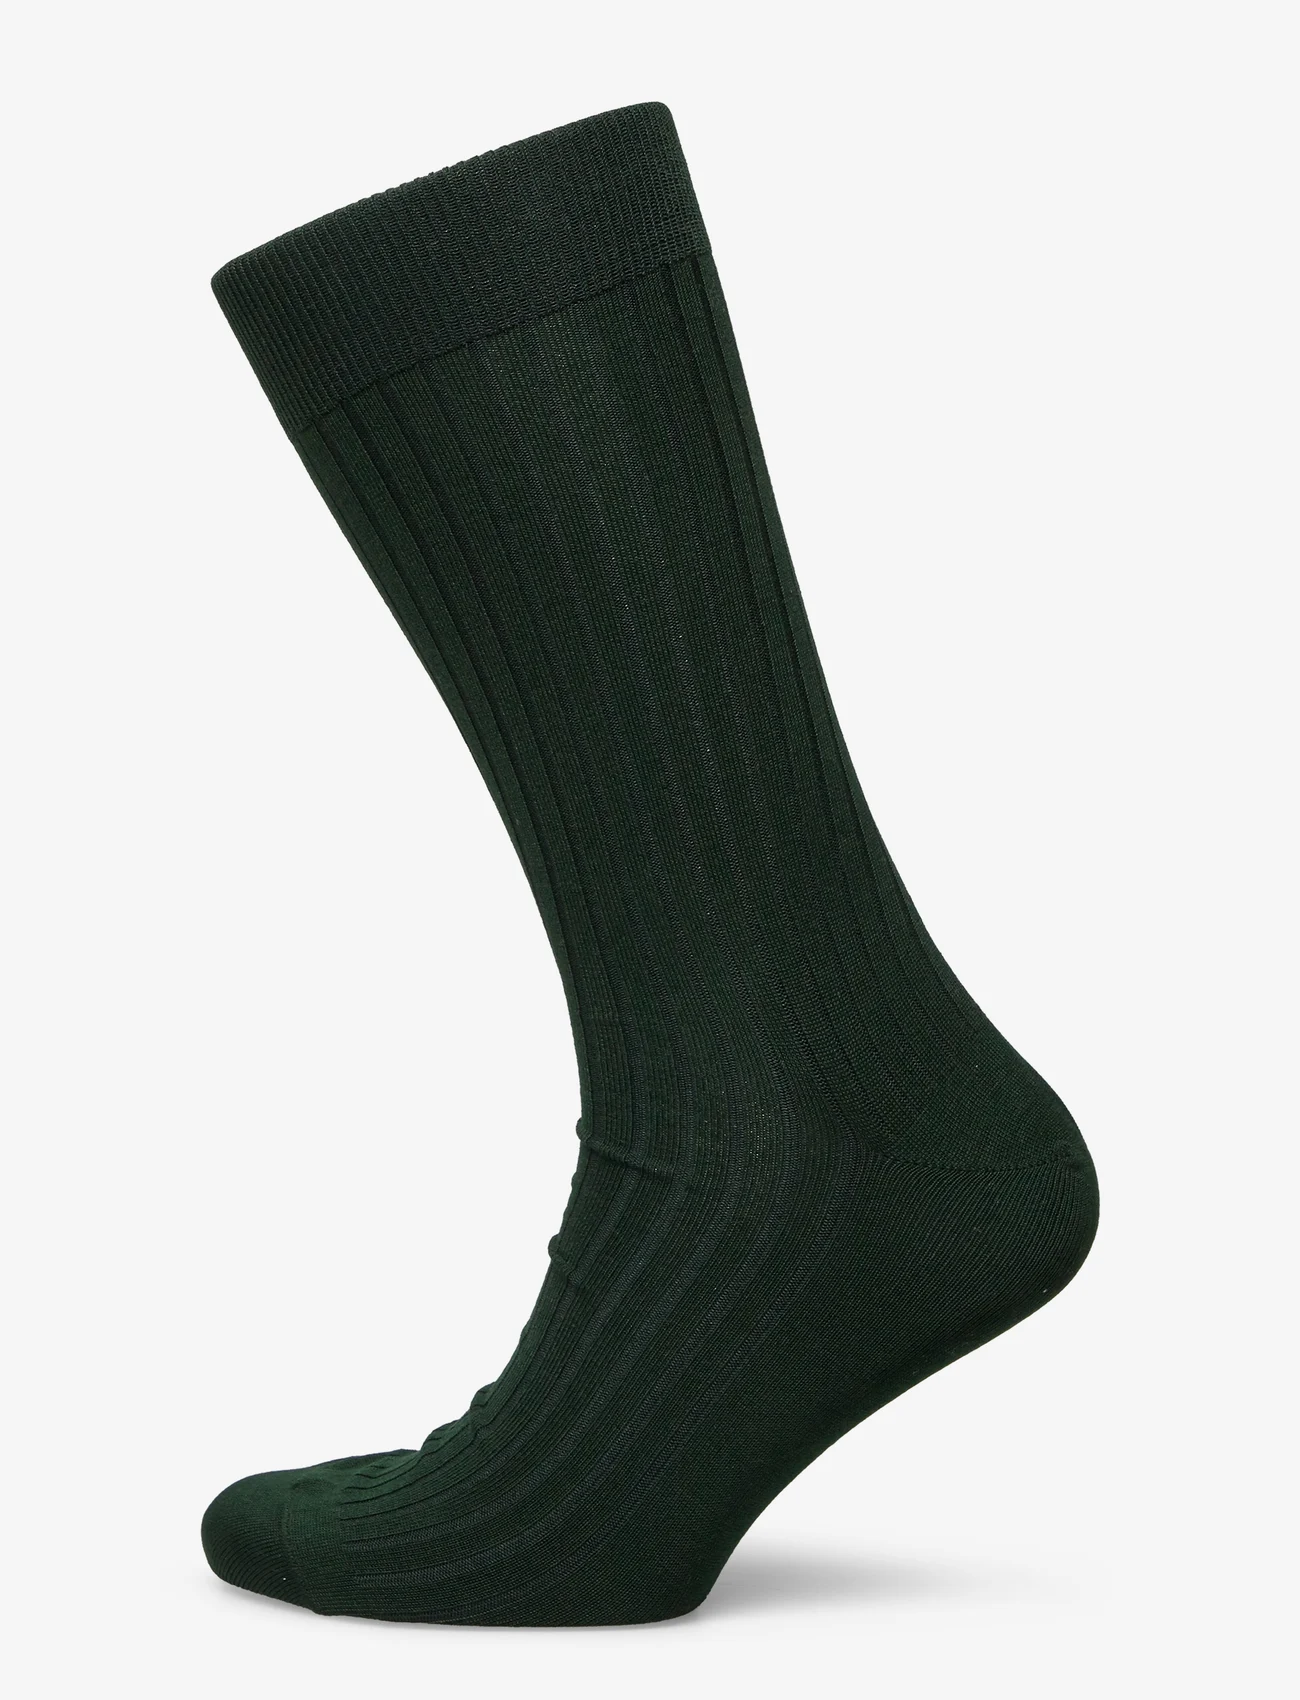 AN IVY - Forrest Green Ribbed Socks - green - 0